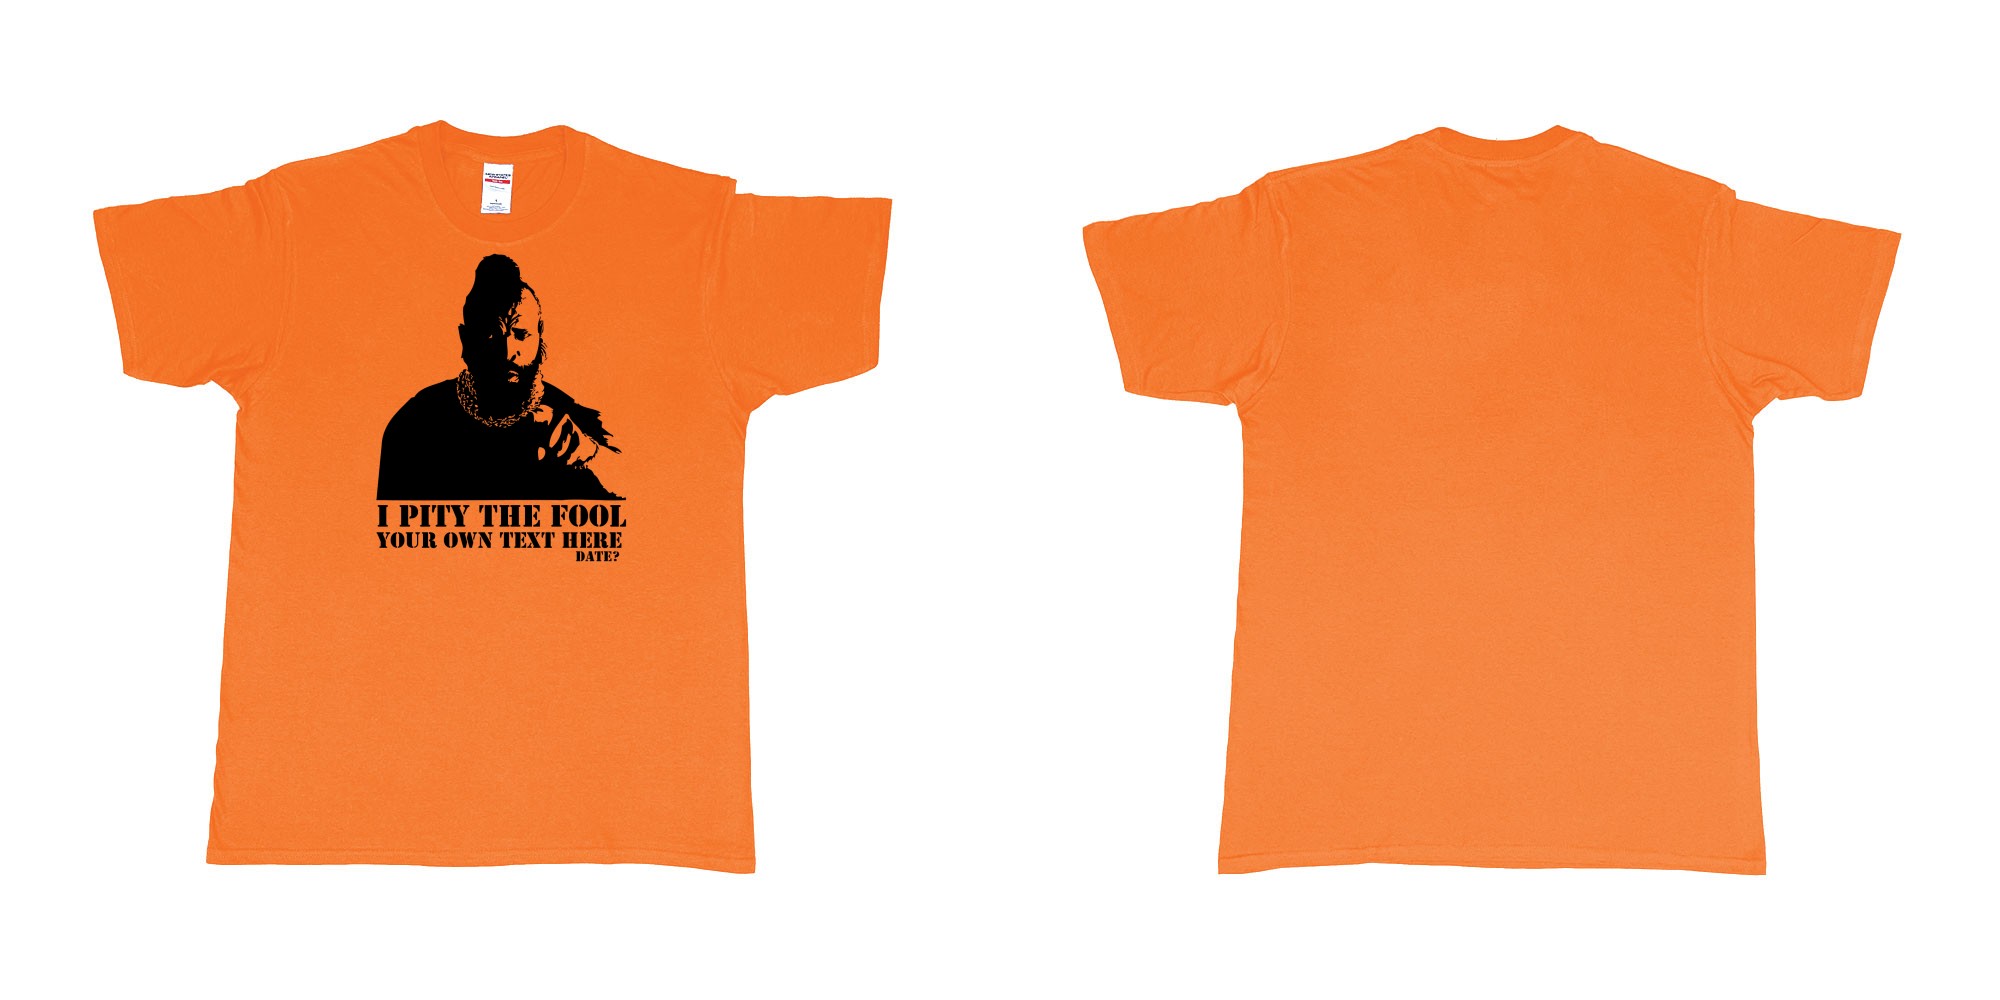 Custom tshirt design I pity the fool in fabric color orange choice your own text made in Bali by The Pirate Way